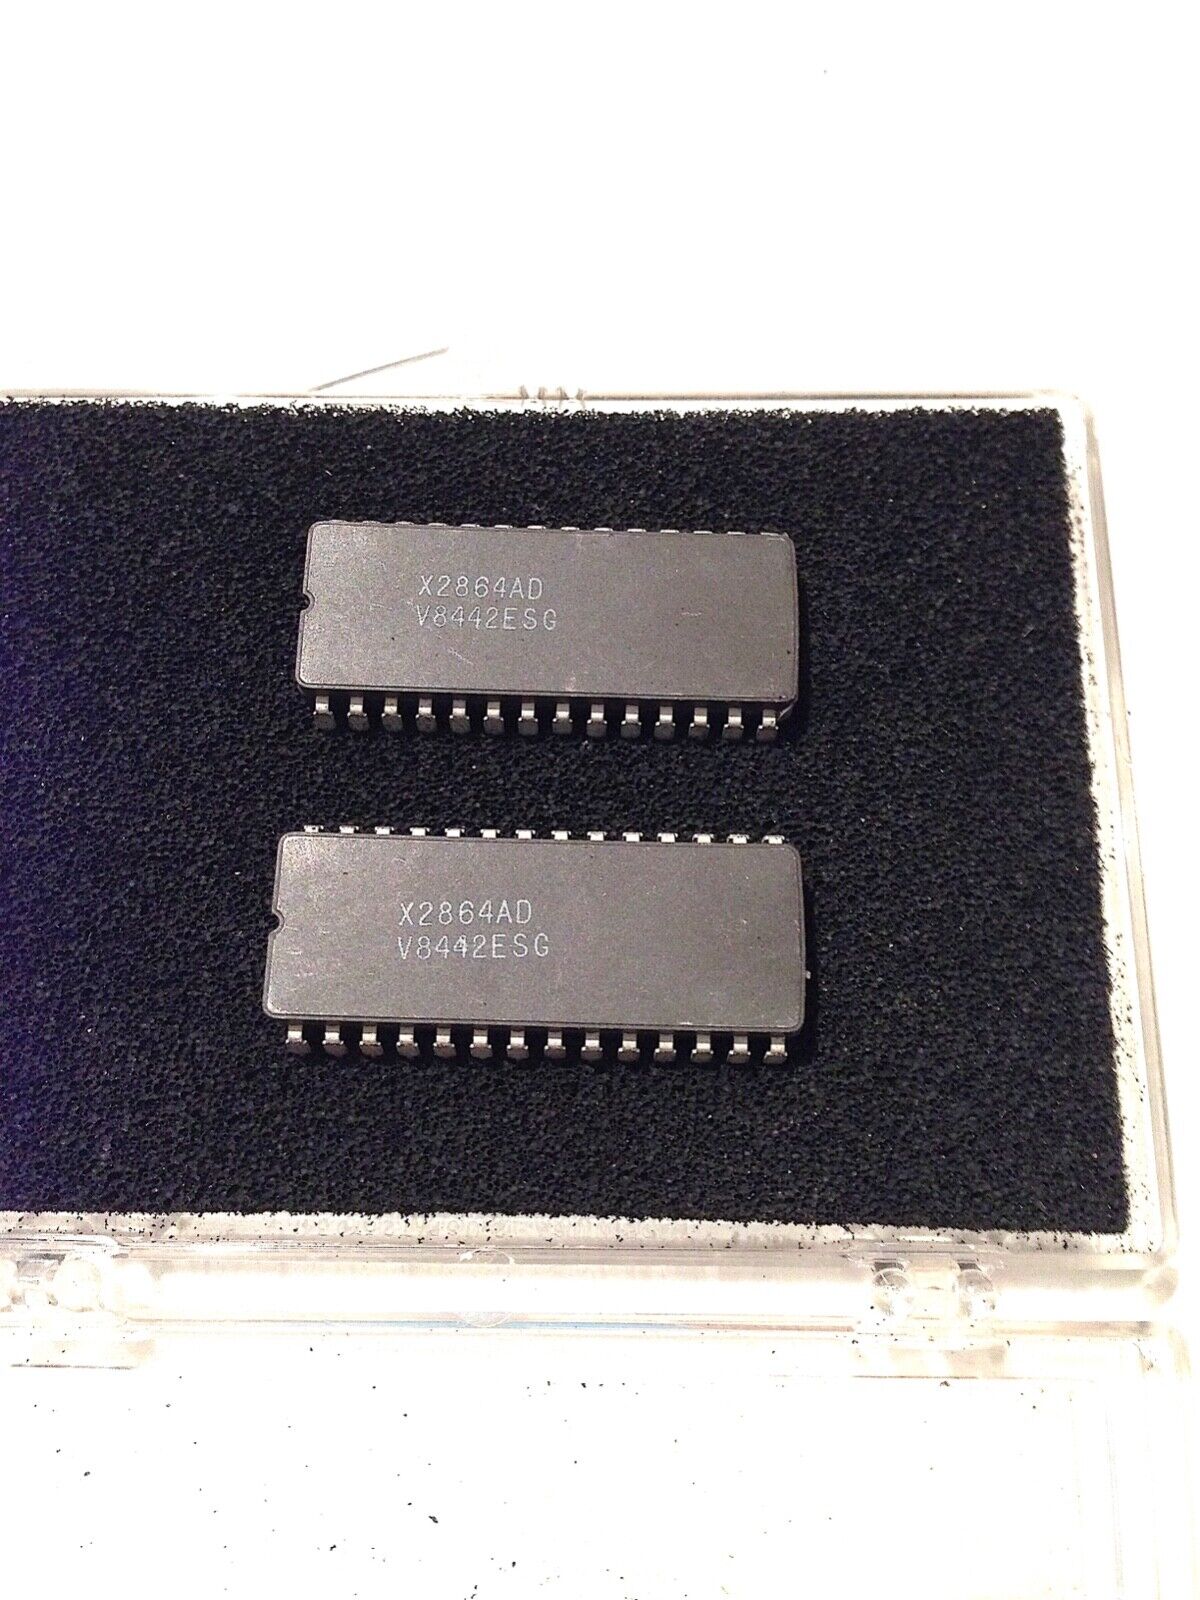 X2864 AD Xicor EEPROM, Vintage 1984 Never Used, 28 Pin Ceramic Pkg, 2 parts